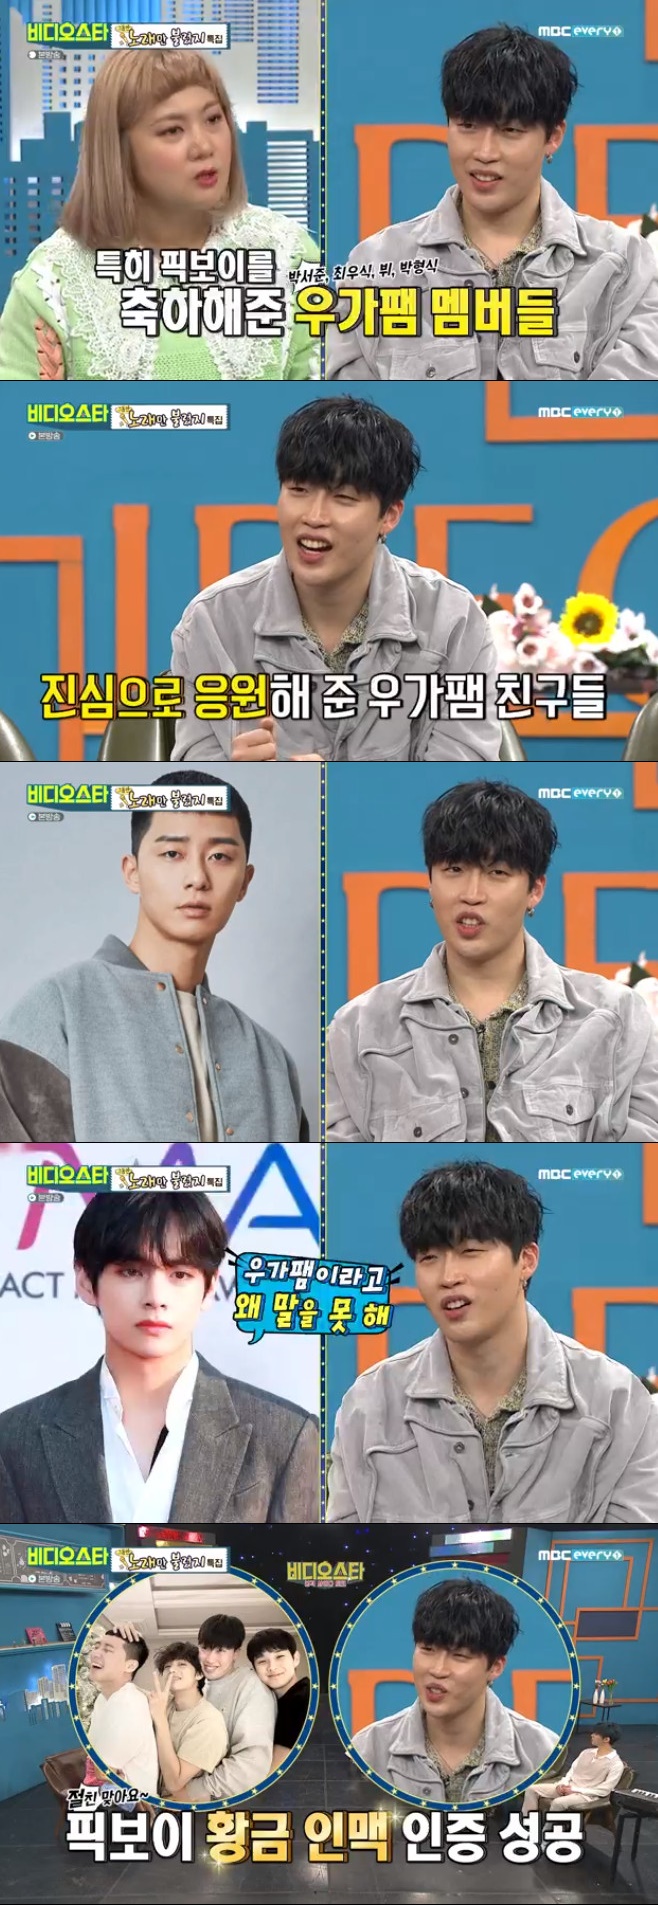 In Video Star, singer The Resurrection of Pigboy Crabshaw mentioned actor Park Seo-joon Choi Woo-shik Park Hyung-sik, group BTS V and group Wugapam.MBC Everlon entertainment program Video Star broadcasted on the evening of the 28th was featured as I have only sang.Singers Ha Dong-gyun, Kim Pil, Pol Kim, The Resurrection of Pigboy Crabshaw, and Gaho appeared as guests.The Resurrection of Pigboy Crabshaw said, Park Seo-joon, Choi Woo-shik, V, Park Hyung-sik and other friends cheered me to do well.Last time I appeared on What do you do when you play, Park Seo-joon sent me a long text.I turned it around three times and I was upset. He released the episode and gave a glimpse of his friendship with his friends.In addition, The Resurrection of Pigboy Crabshaw said, I was hesitant to hurt them, but V told me to tell them that it was Ugapam on the air. They and I are close.